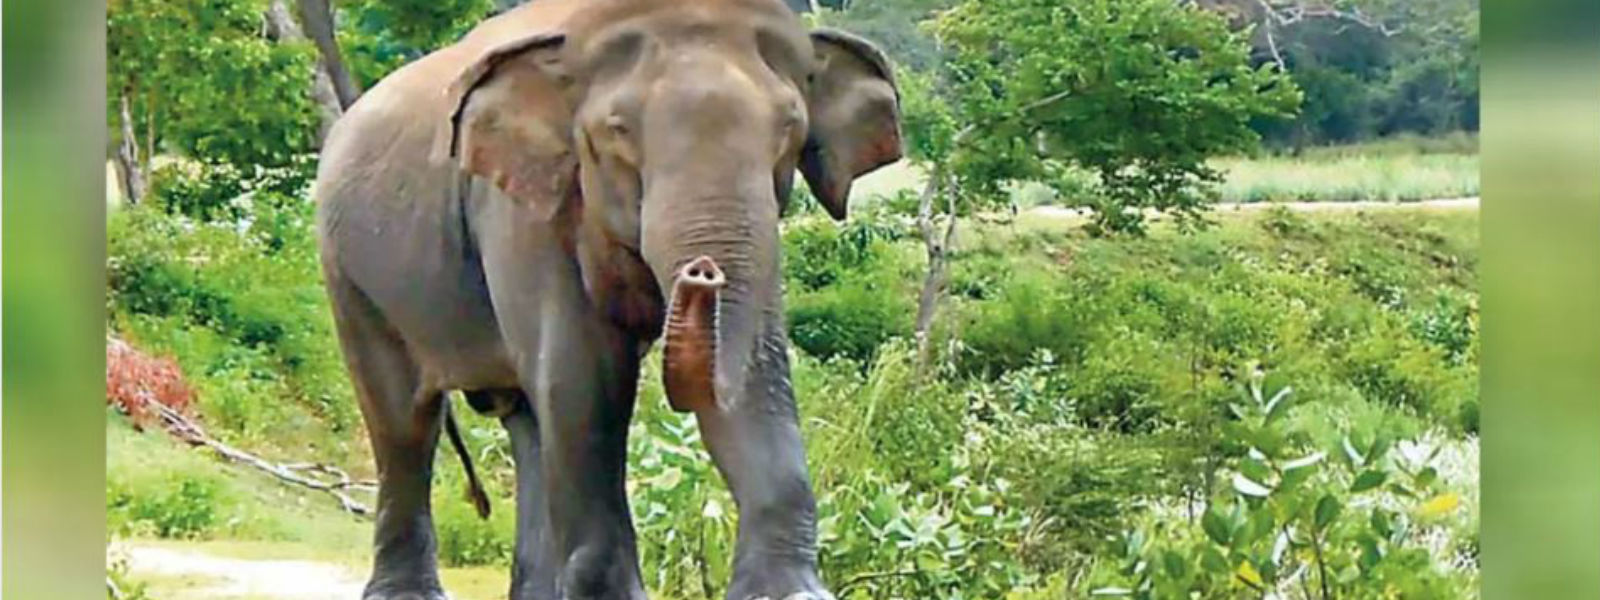 Several villages in a sad plight due to elephants 